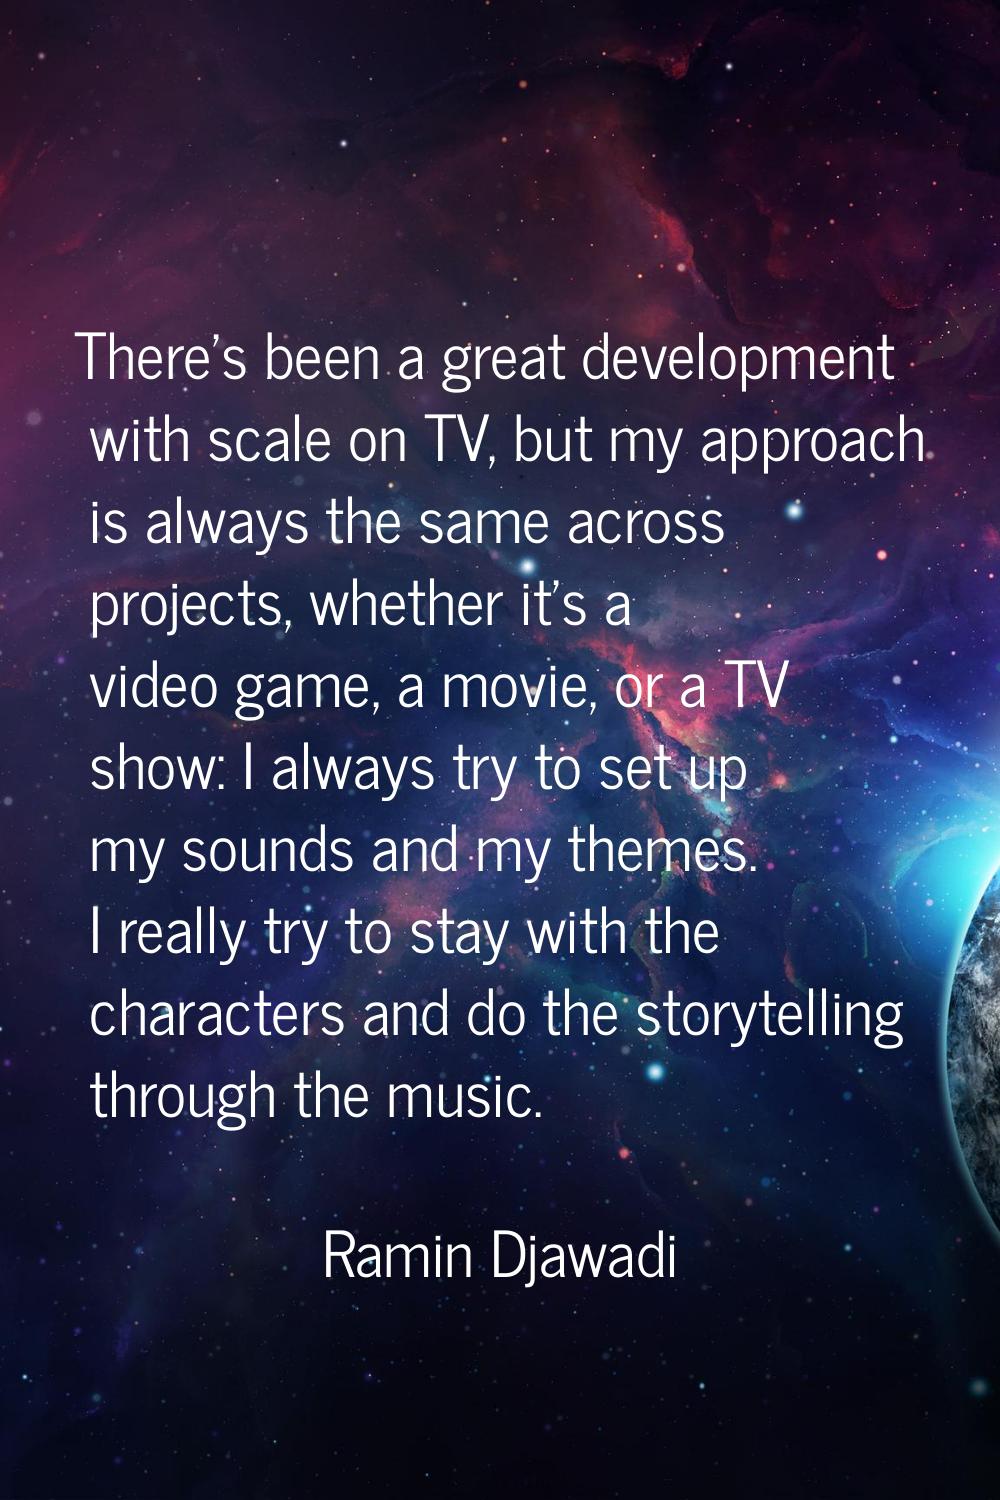 There's been a great development with scale on TV, but my approach is always the same across projec